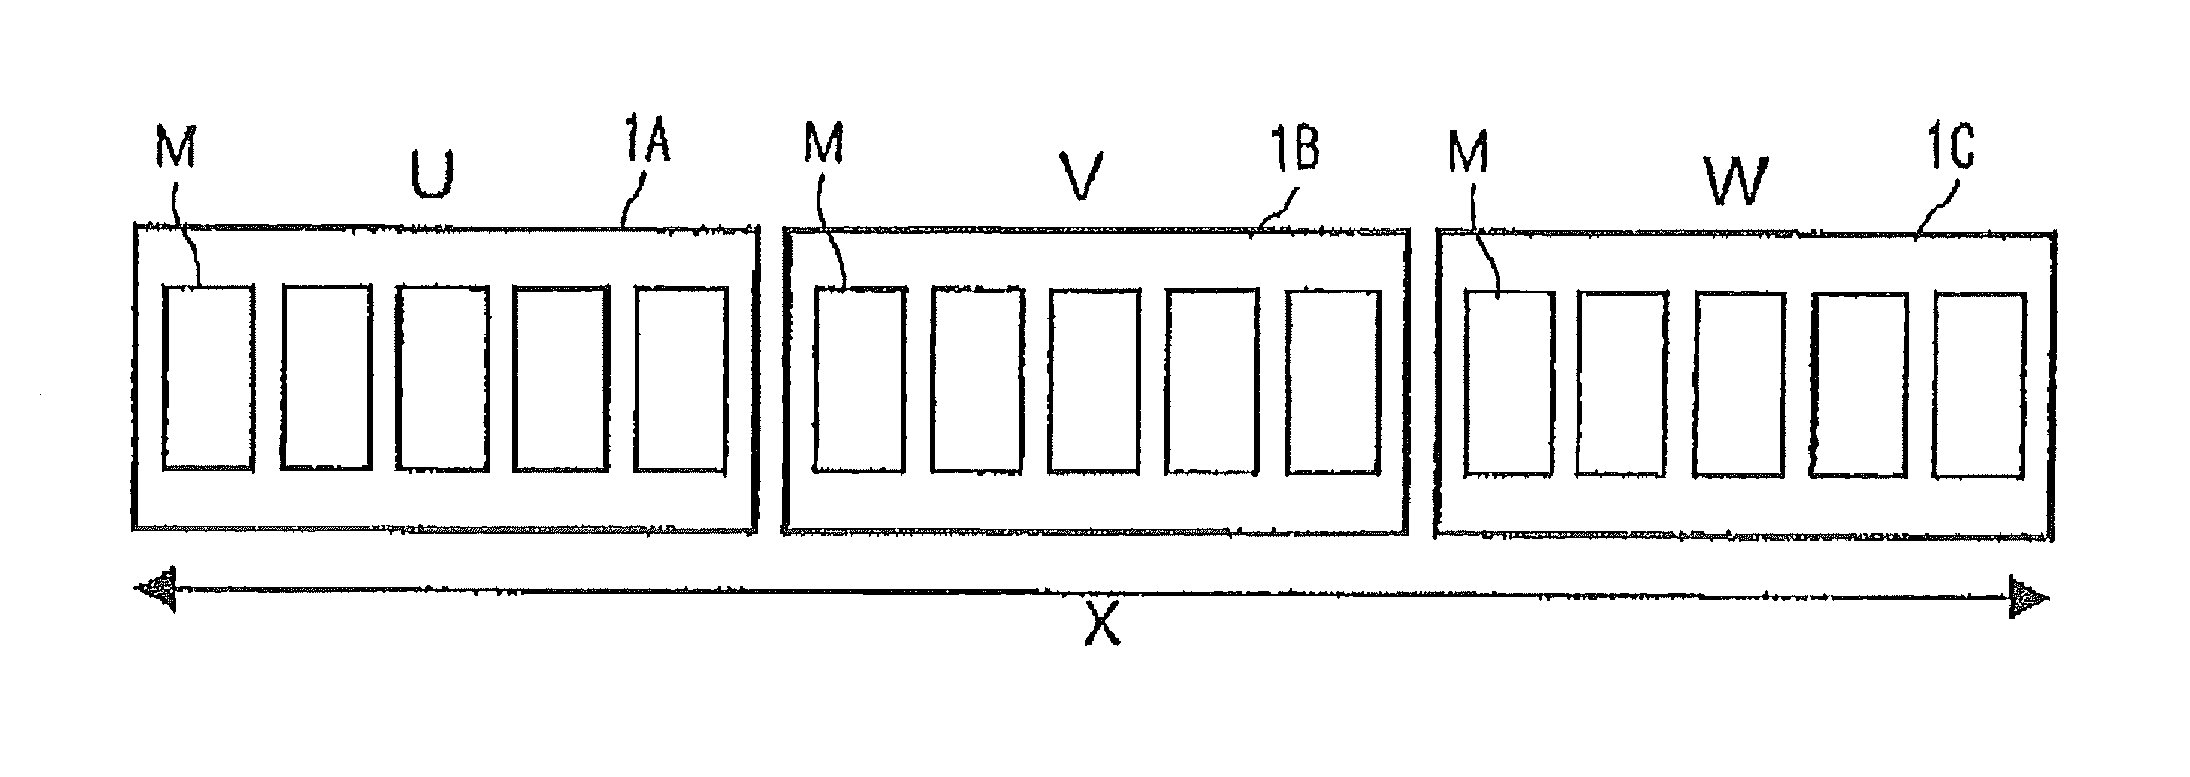 Stacked structure of power conversion apparatus